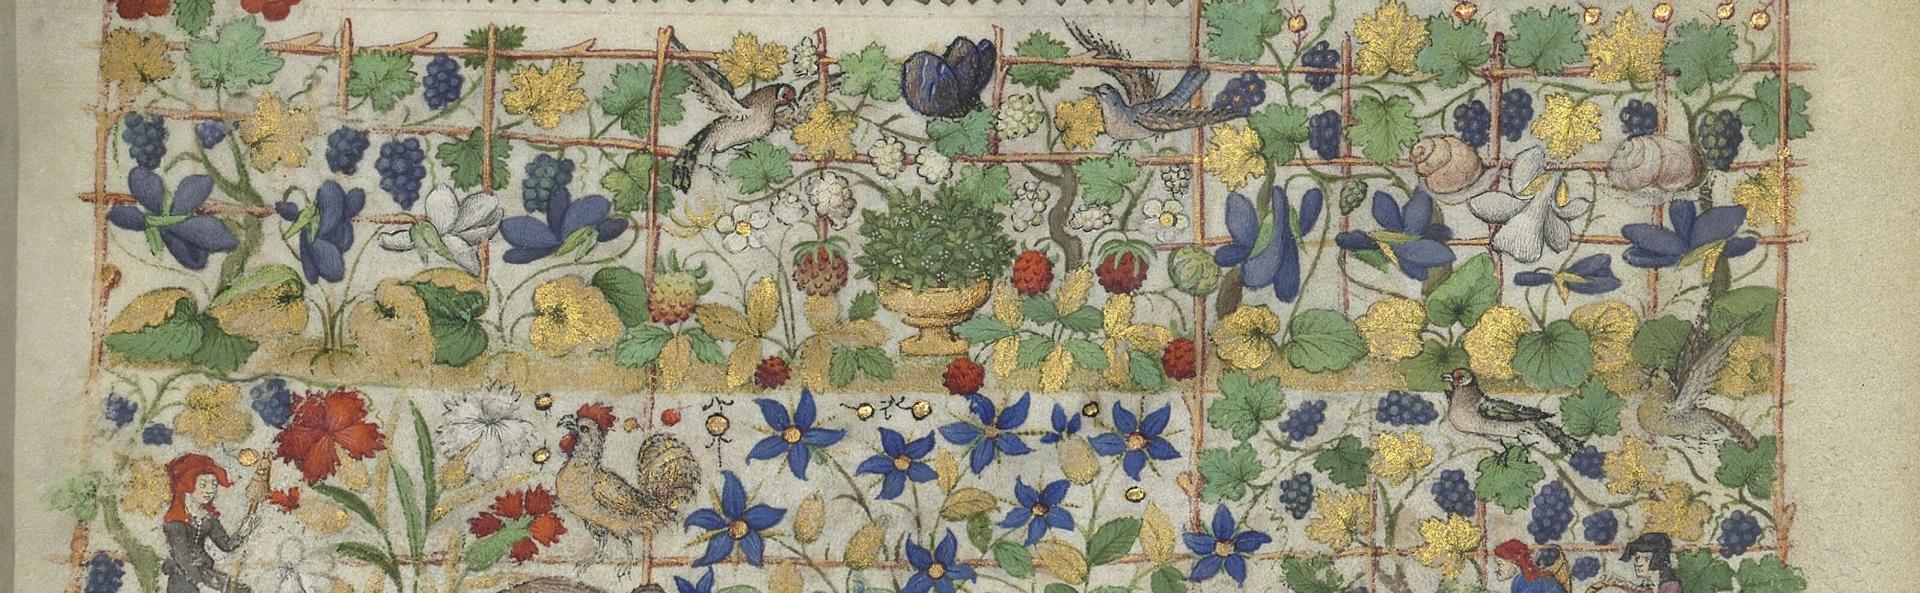 Beginning of the ‚Hours of the Virgin‘ with miniature and illuminated floral border, including vines, violets, strawberries, people and various animals.